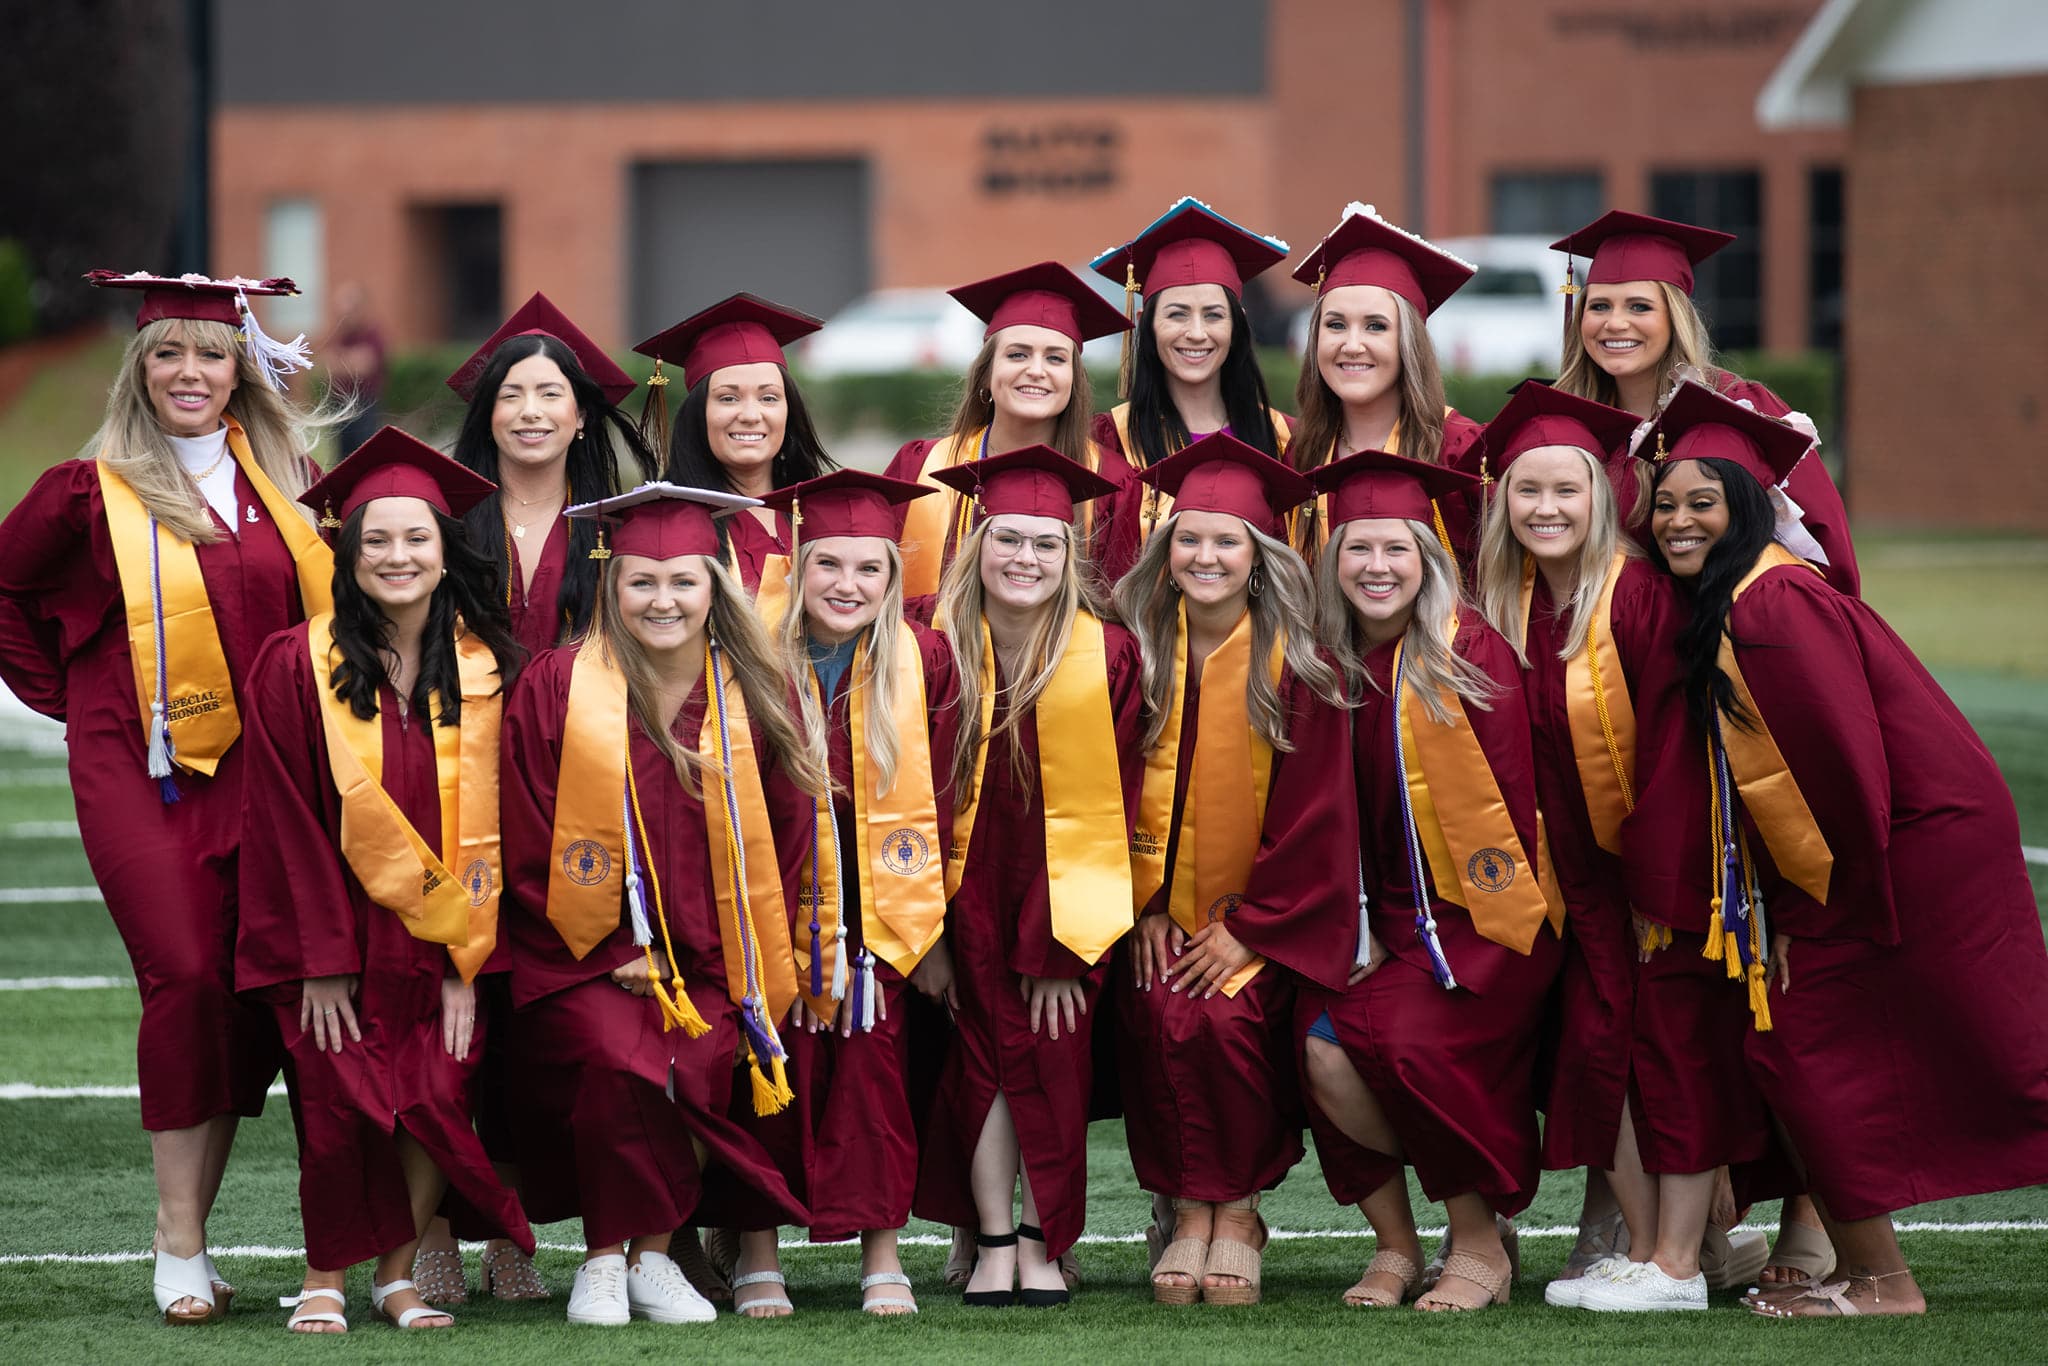 Several women gather in their maroon robes at PRCC Graduation 2022